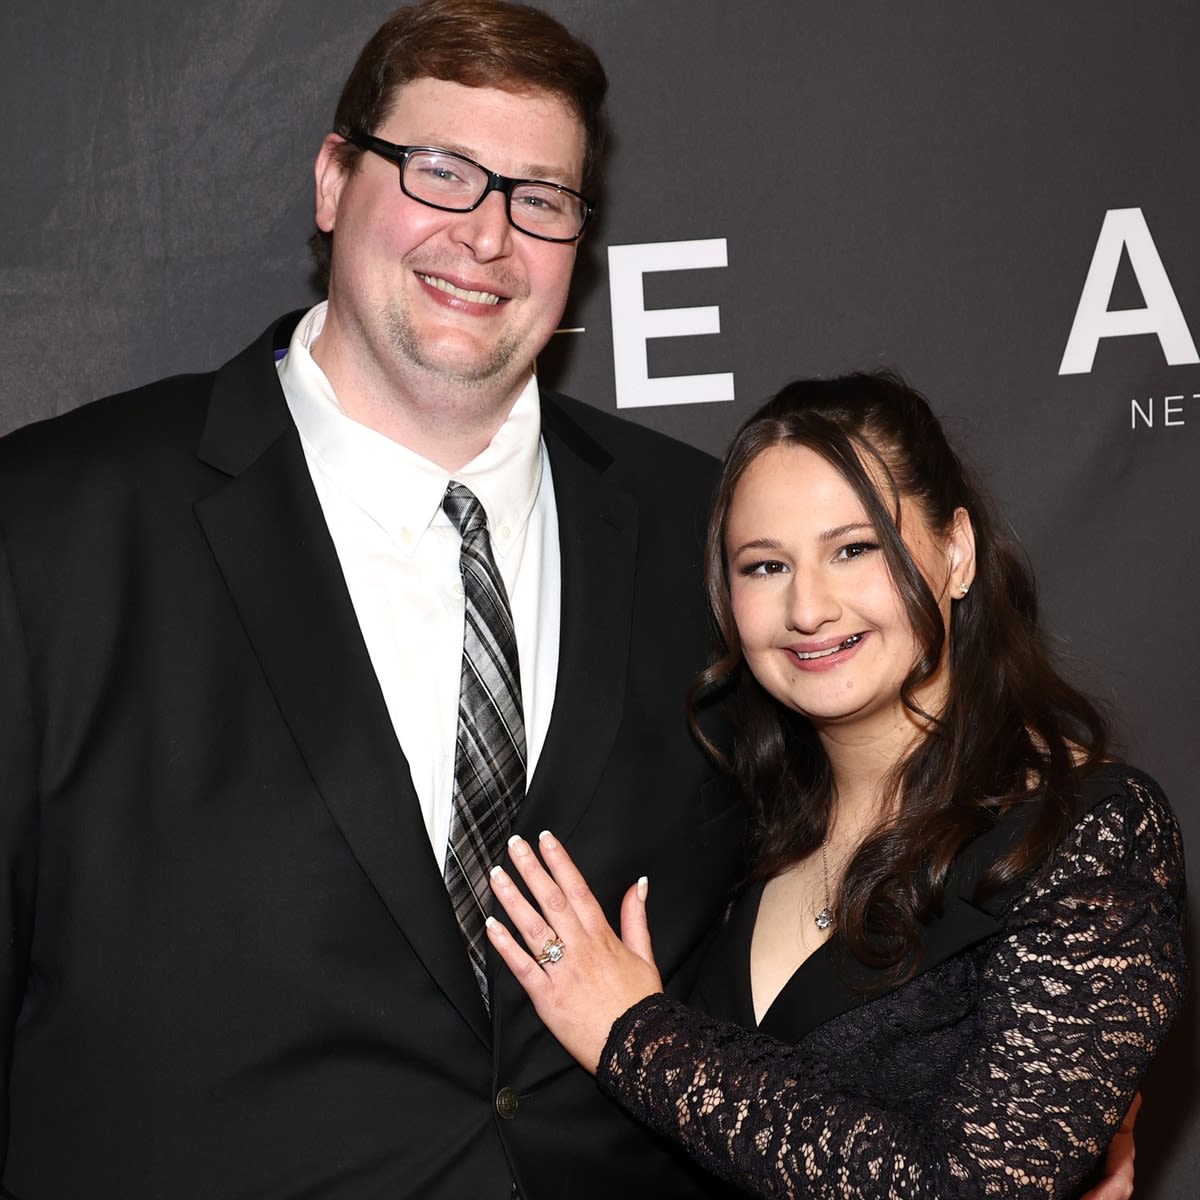 Gypsy Rose Blanchard's Ex Ryan Anderson Reacts to Ken Urker Reunion